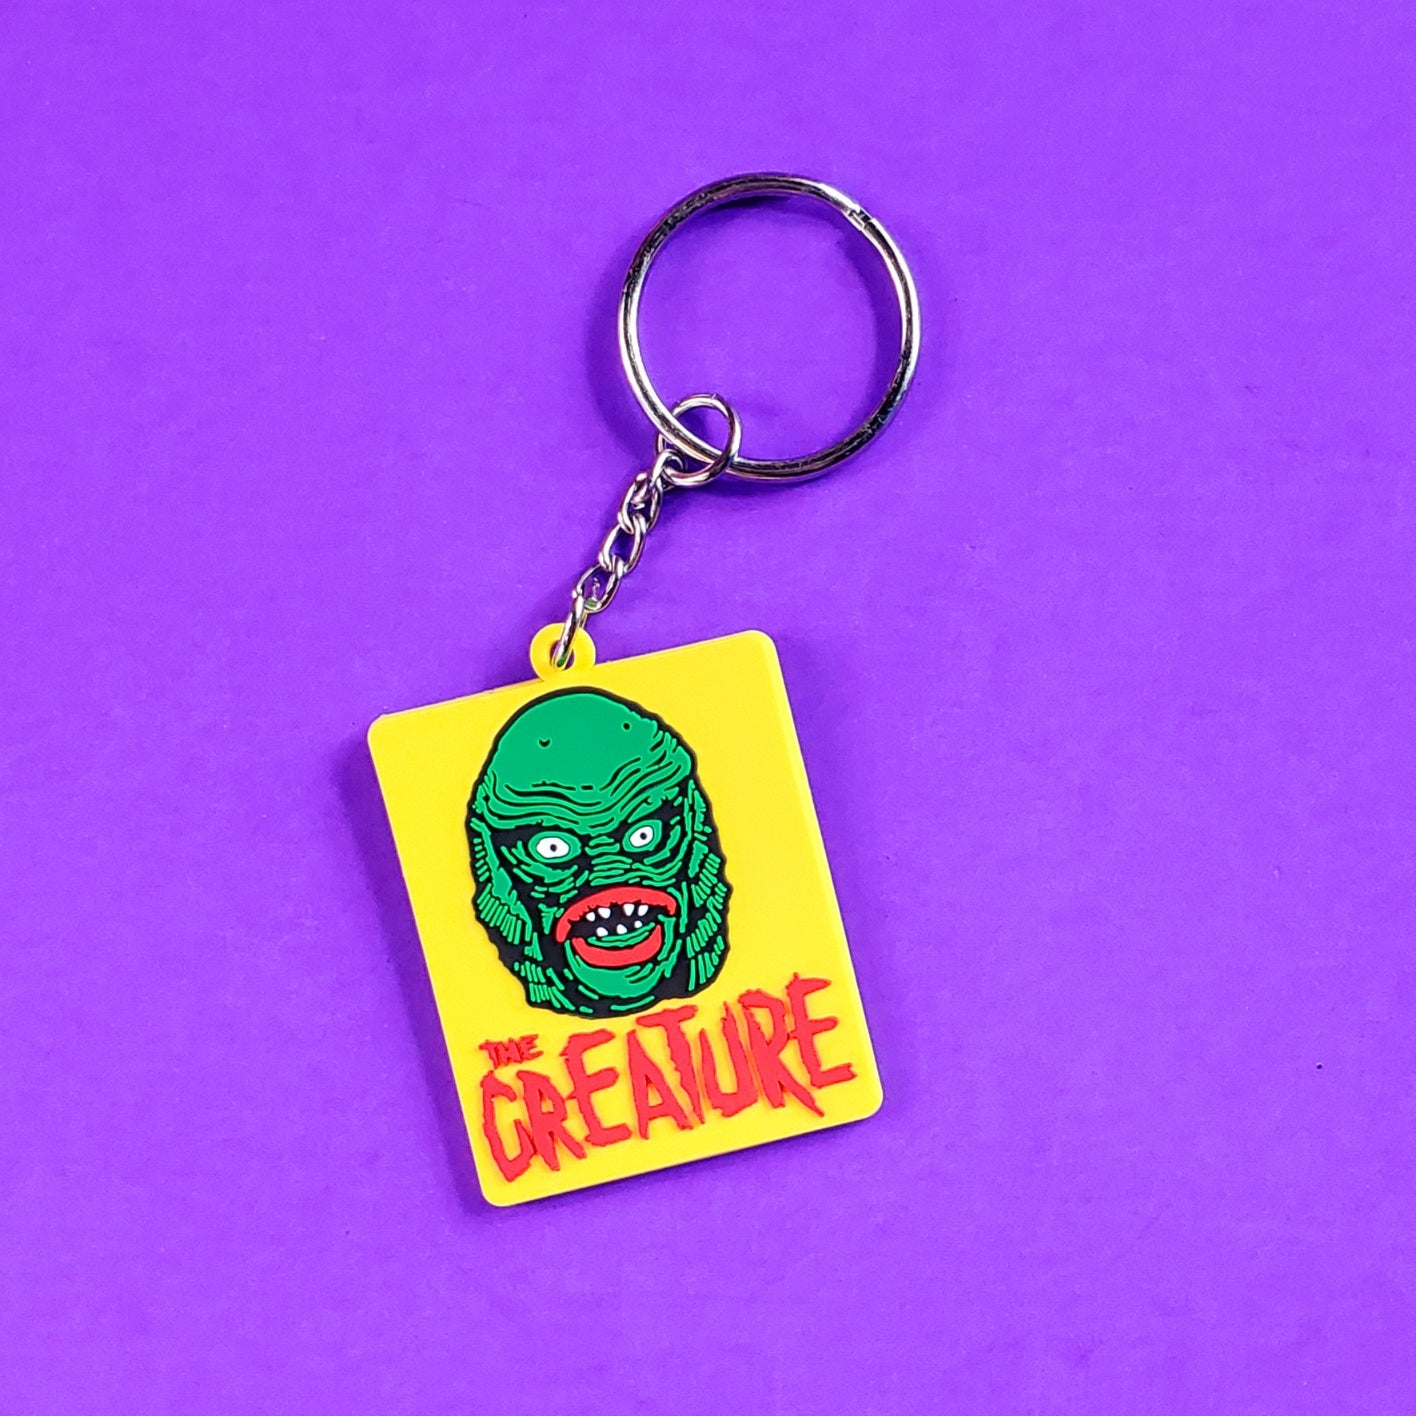 Rectangular PVC keychain of the Creature from the Black Lagoon on a bright yellow background with “THE CREATURE” written in red jagged text